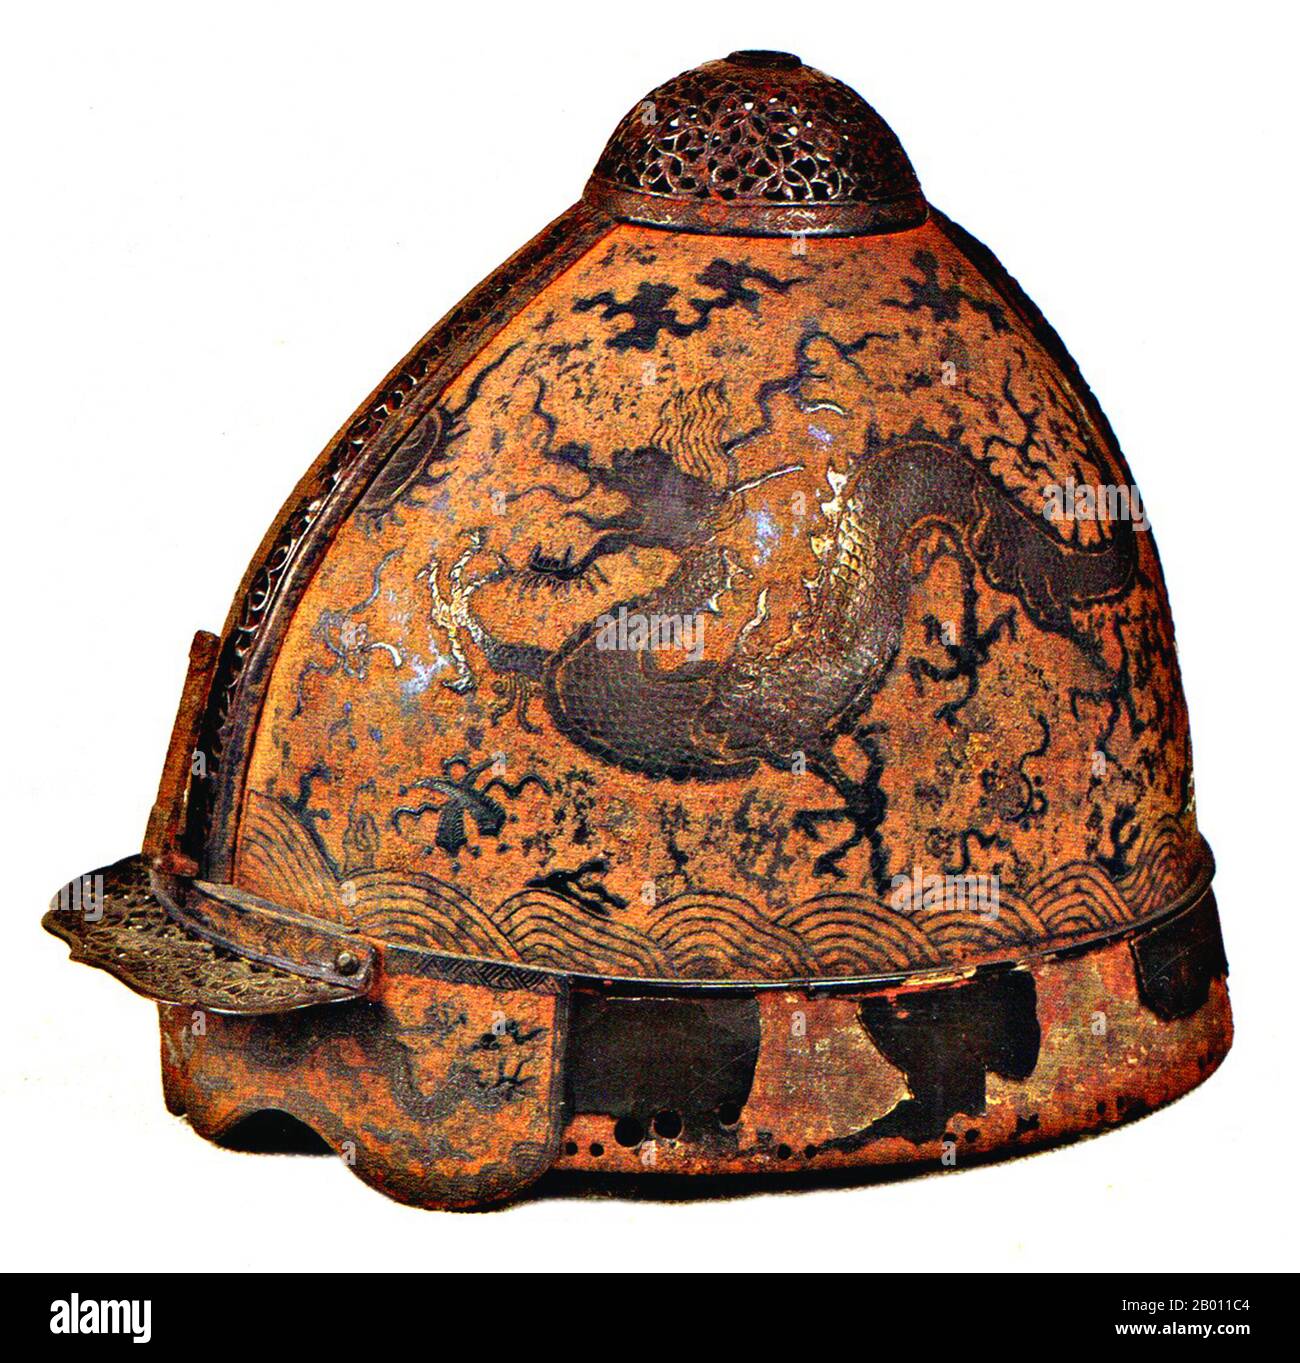 Japan: A Mongol helmet taken as a trophy by the victorious Japanese during the Yuan invasion of 1274 or 1281.  The Mongol invasions of Japan of 1274 and 1281 were major military invasions undertaken by Kublai Khan to conquer the Japanese islands after the submission of Korea. Despite their ultimate failure, the invasion attempts are of historical importance, because they set a limit on Mongol expansion, and rank as nation-defining events in Japanese history. The Japanese were successful, in part because the Mongols lost up to 75% of their troops and supplies as a result of major storms at sea. Stock Photo